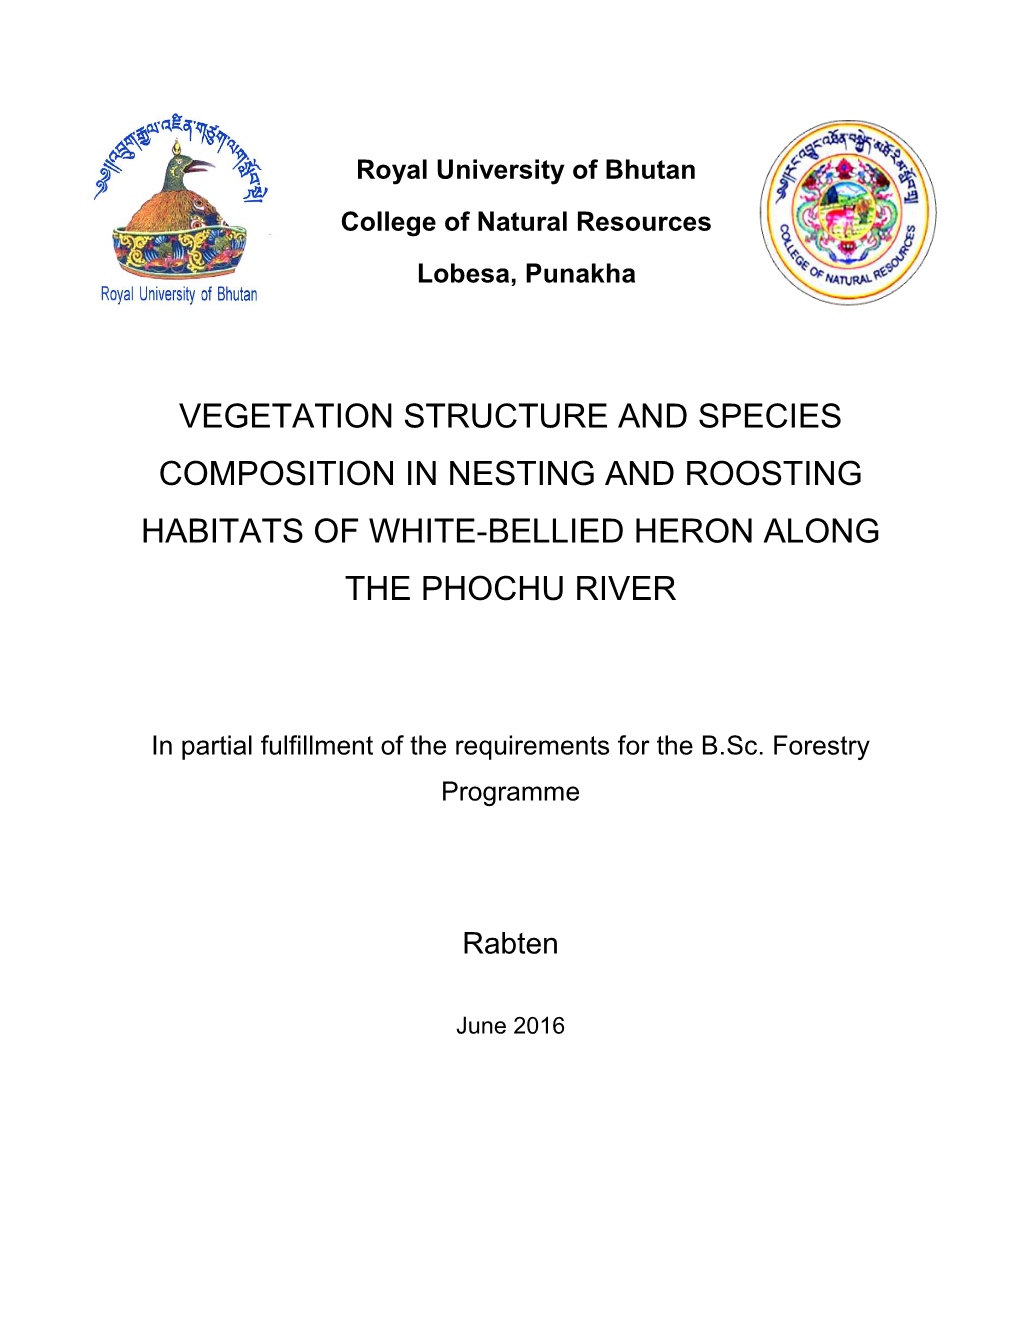 Vegetation Structure and Species Composition in Nesting and Roosting Habitats of White-Bellied Heron Along the Phochu River